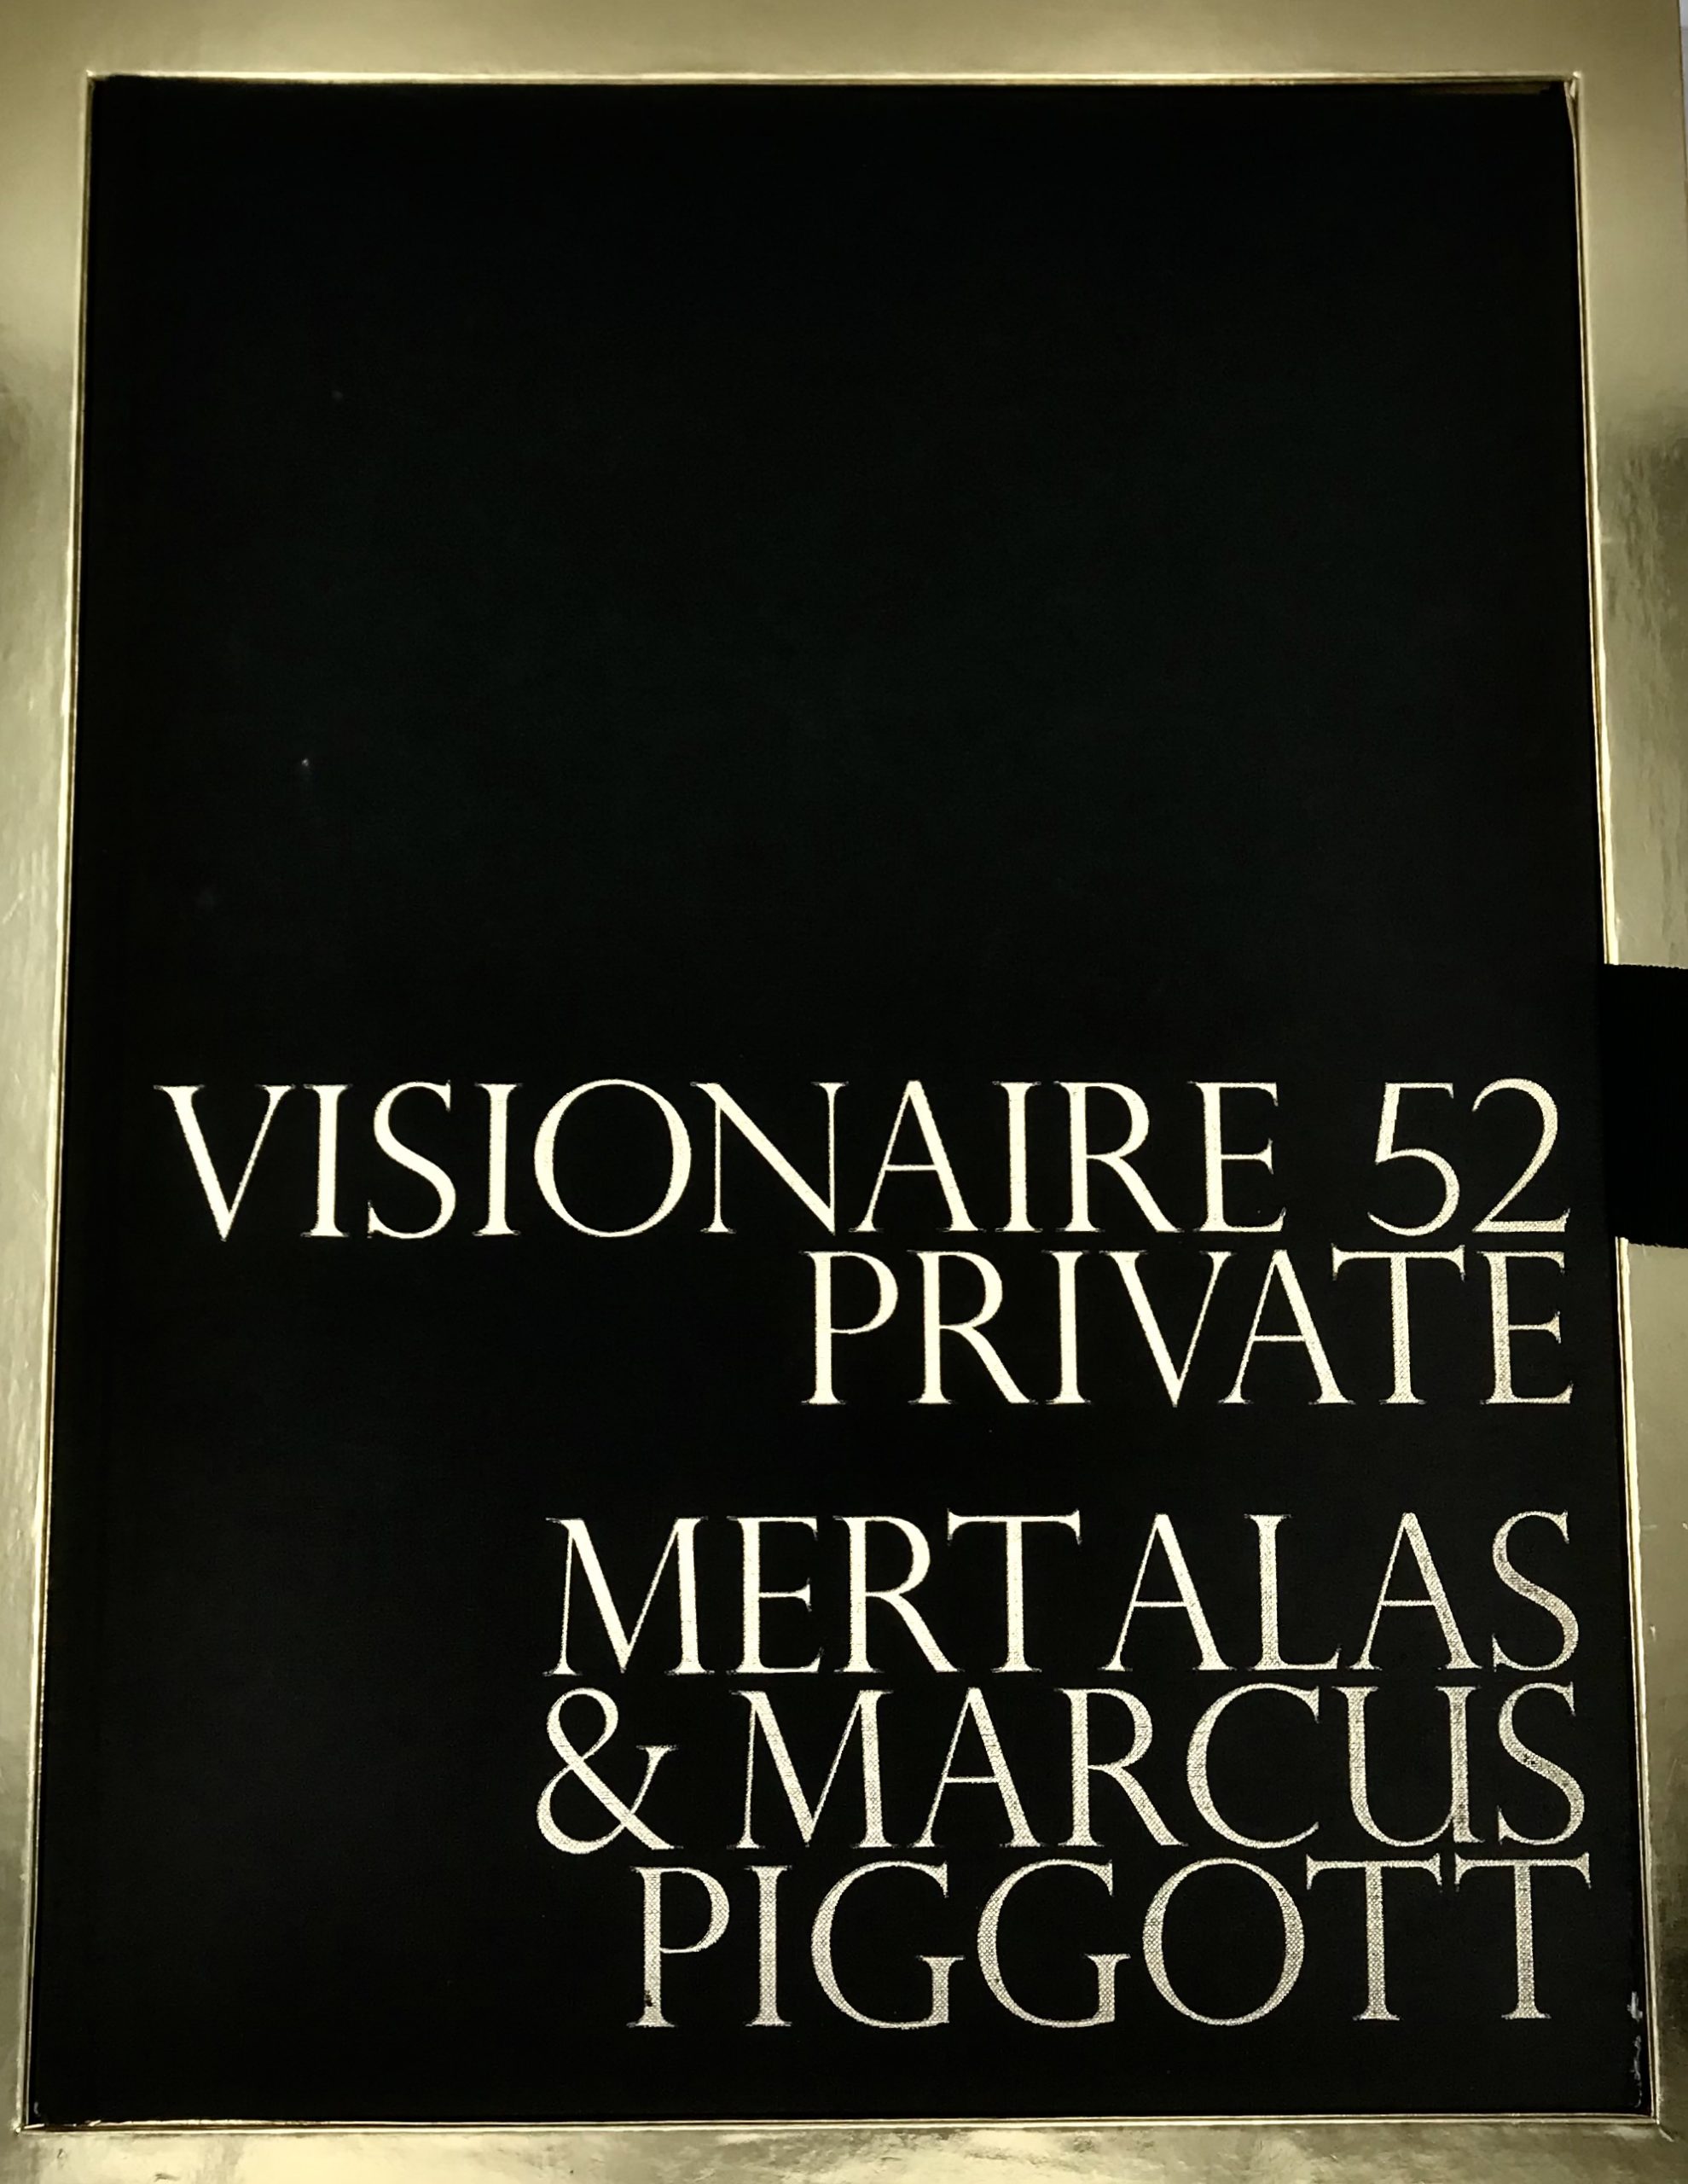 Visionaire Private Limited Edition Hardcover Book in Louis Vuitton